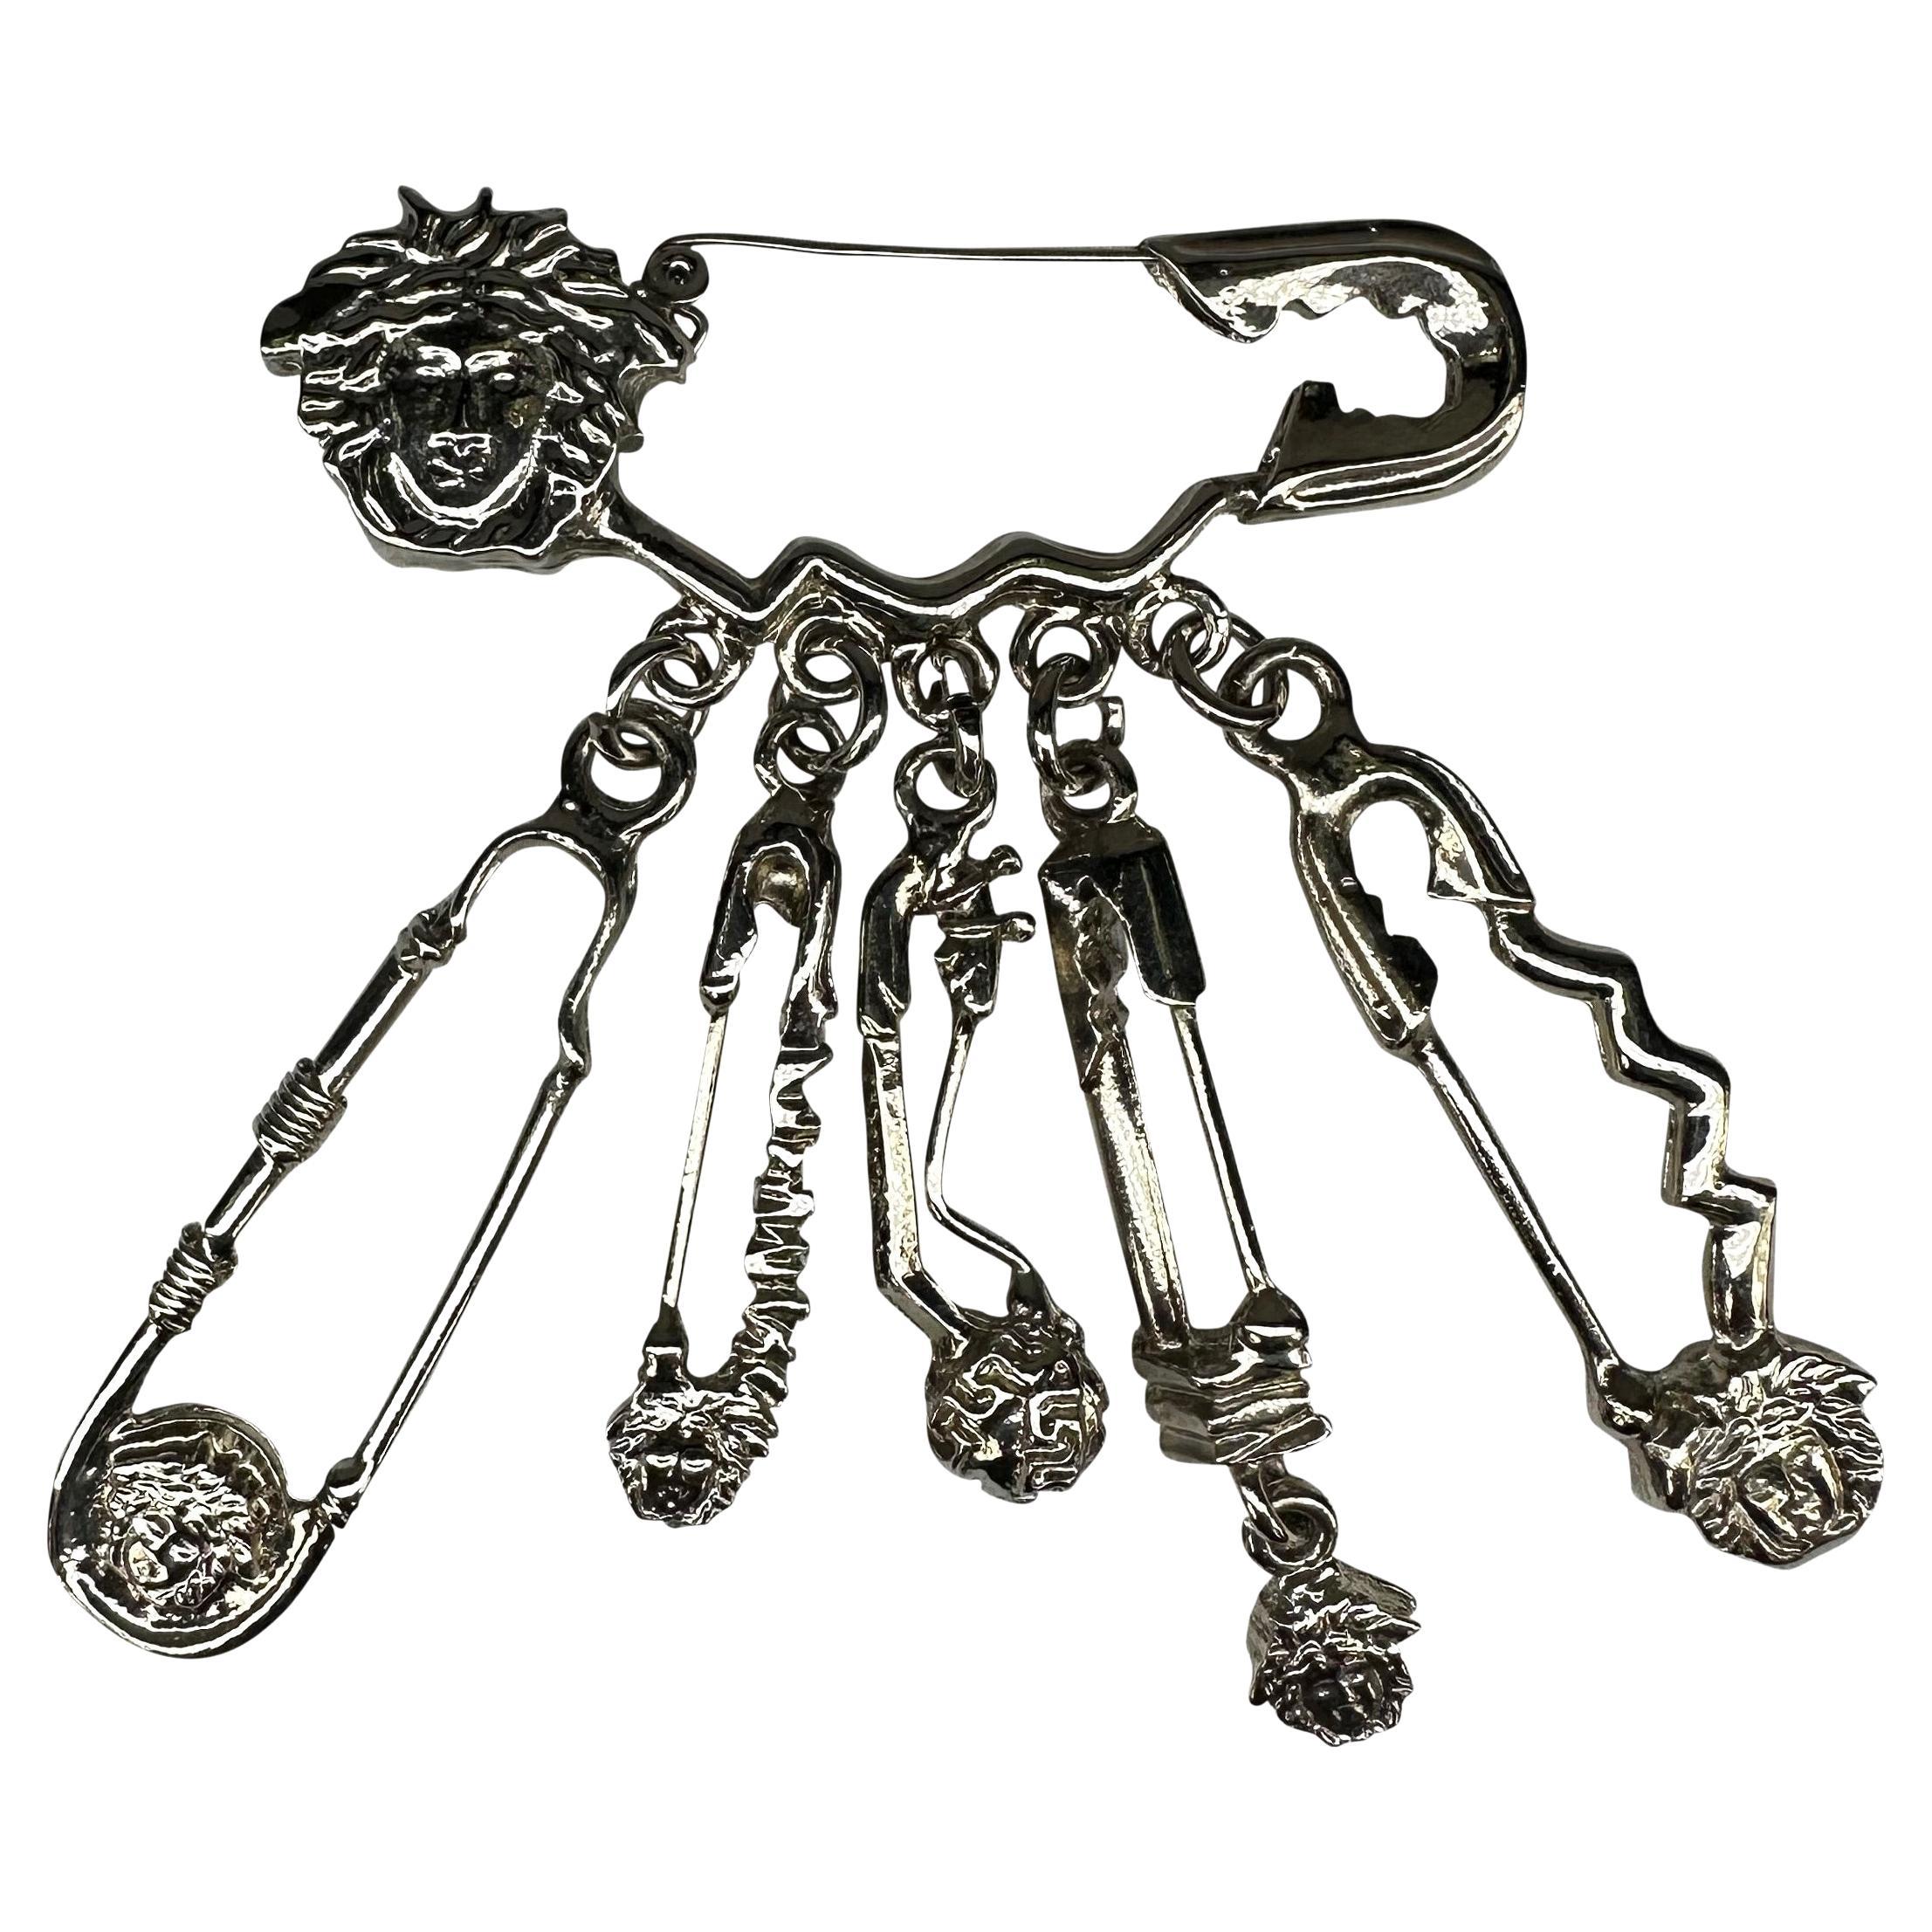 S/S 1994 Gianni Versace Silver Tone Medusa Logo Safety Pin Costume Brooch 